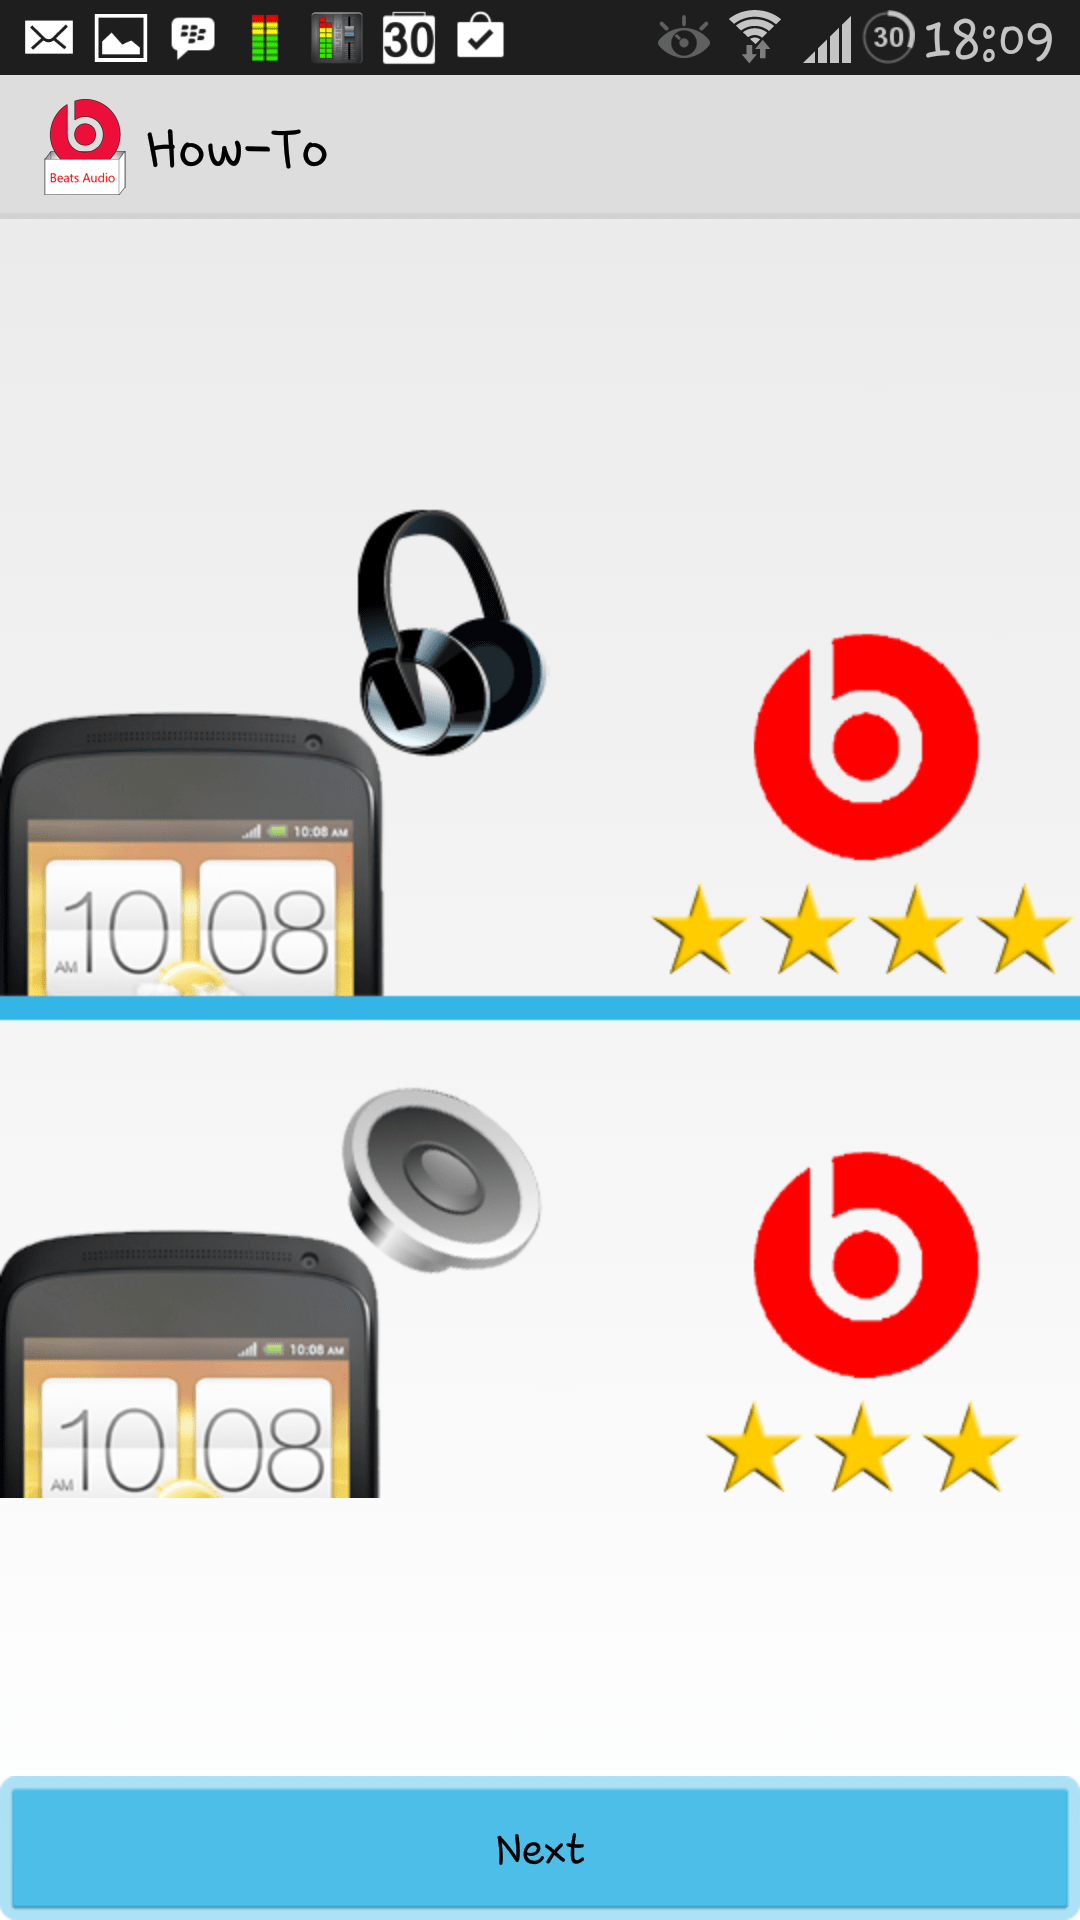 beats audio apk for unrooted android